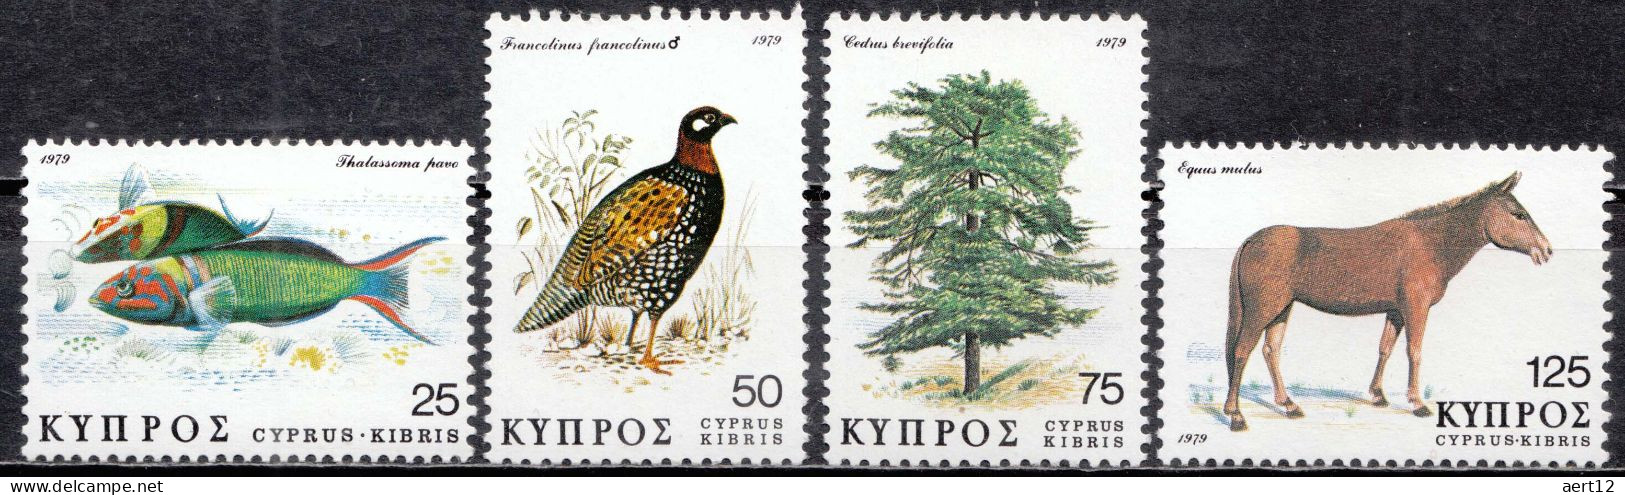 1979, Cyprus, Flora And Fauna, Trees, Birds, Fishes, Horses, 4 Stamps, MNH(**), CY 504-07 - Ongebruikt